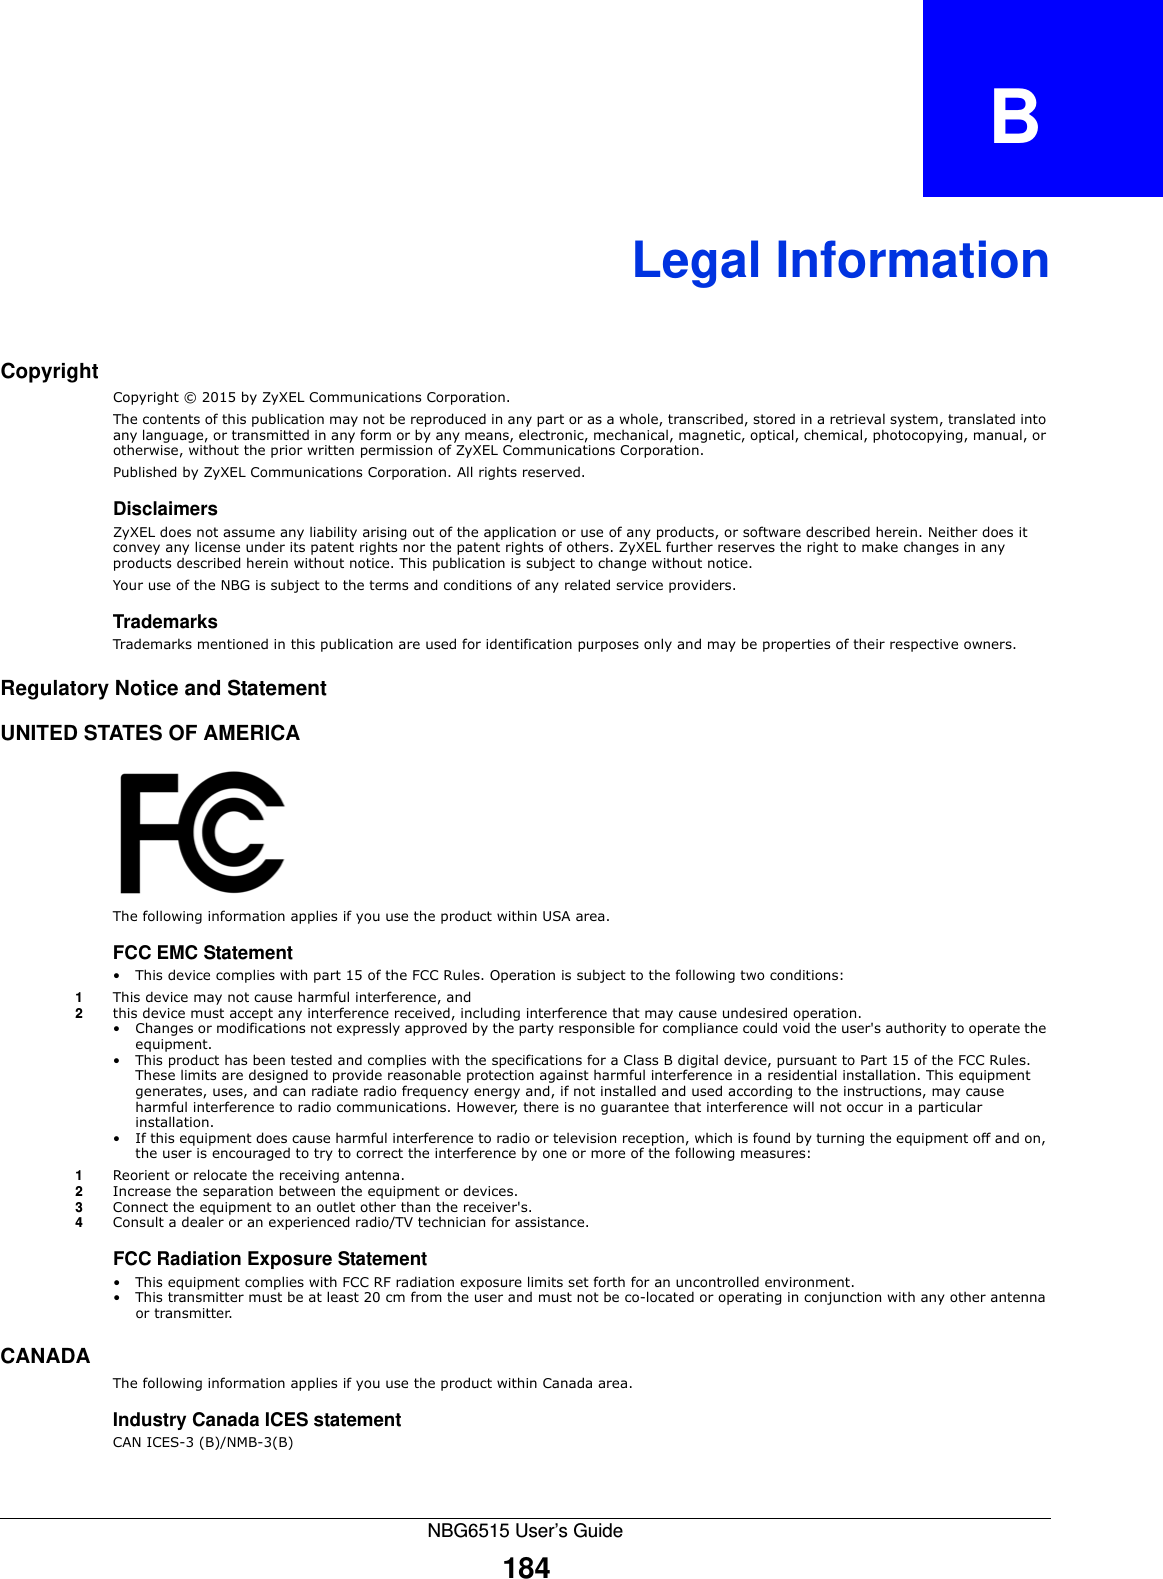 NBG6515 User’s Guide184APPENDIX   BLegal InformationCopyrightCopyright © 2015 by ZyXEL Communications Corporation.The contents of this publication may not be reproduced in any part or as a whole, transcribed, stored in a retrieval system, translated into any language, or transmitted in any form or by any means, electronic, mechanical, magnetic, optical, chemical, photocopying, manual, or otherwise, without the prior written permission of ZyXEL Communications Corporation.Published by ZyXEL Communications Corporation. All rights reserved.DisclaimersZyXEL does not assume any liability arising out of the application or use of any products, or software described herein. Neither does it convey any license under its patent rights nor the patent rights of others. ZyXEL further reserves the right to make changes in any products described herein without notice. This publication is subject to change without notice.Your use of the NBG is subject to the terms and conditions of any related service providers. TrademarksTrademarks mentioned in this publication are used for identification purposes only and may be properties of their respective owners.Regulatory Notice and StatementUNITED STATES OF AMERICAThe following information applies if you use the product within USA area.FCC EMC Statement • This device complies with part 15 of the FCC Rules. Operation is subject to the following two conditions:1This device may not cause harmful interference, and 2this device must accept any interference received, including interference that may cause undesired operation.• Changes or modifications not expressly approved by the party responsible for compliance could void the user&apos;s authority to operate the equipment.• This product has been tested and complies with the specifications for a Class B digital device, pursuant to Part 15 of the FCC Rules. These limits are designed to provide reasonable protection against harmful interference in a residential installation. This equipment generates, uses, and can radiate radio frequency energy and, if not installed and used according to the instructions, may cause harmful interference to radio communications. However, there is no guarantee that interference will not occur in a particular installation. • If this equipment does cause harmful interference to radio or television reception, which is found by turning the equipment off and on, the user is encouraged to try to correct the interference by one or more of the following measures:1Reorient or relocate the receiving antenna.2Increase the separation between the equipment or devices.3Connect the equipment to an outlet other than the receiver&apos;s.4Consult a dealer or an experienced radio/TV technician for assistance.FCC Radiation Exposure Statement• This equipment complies with FCC RF radiation exposure limits set forth for an uncontrolled environment. • This transmitter must be at least 20 cm from the user and must not be co-located or operating in conjunction with any other antenna or transmitter.CANADAThe following information applies if you use the product within Canada area.Industry Canada ICES statementCAN ICES-3 (B)/NMB-3(B)